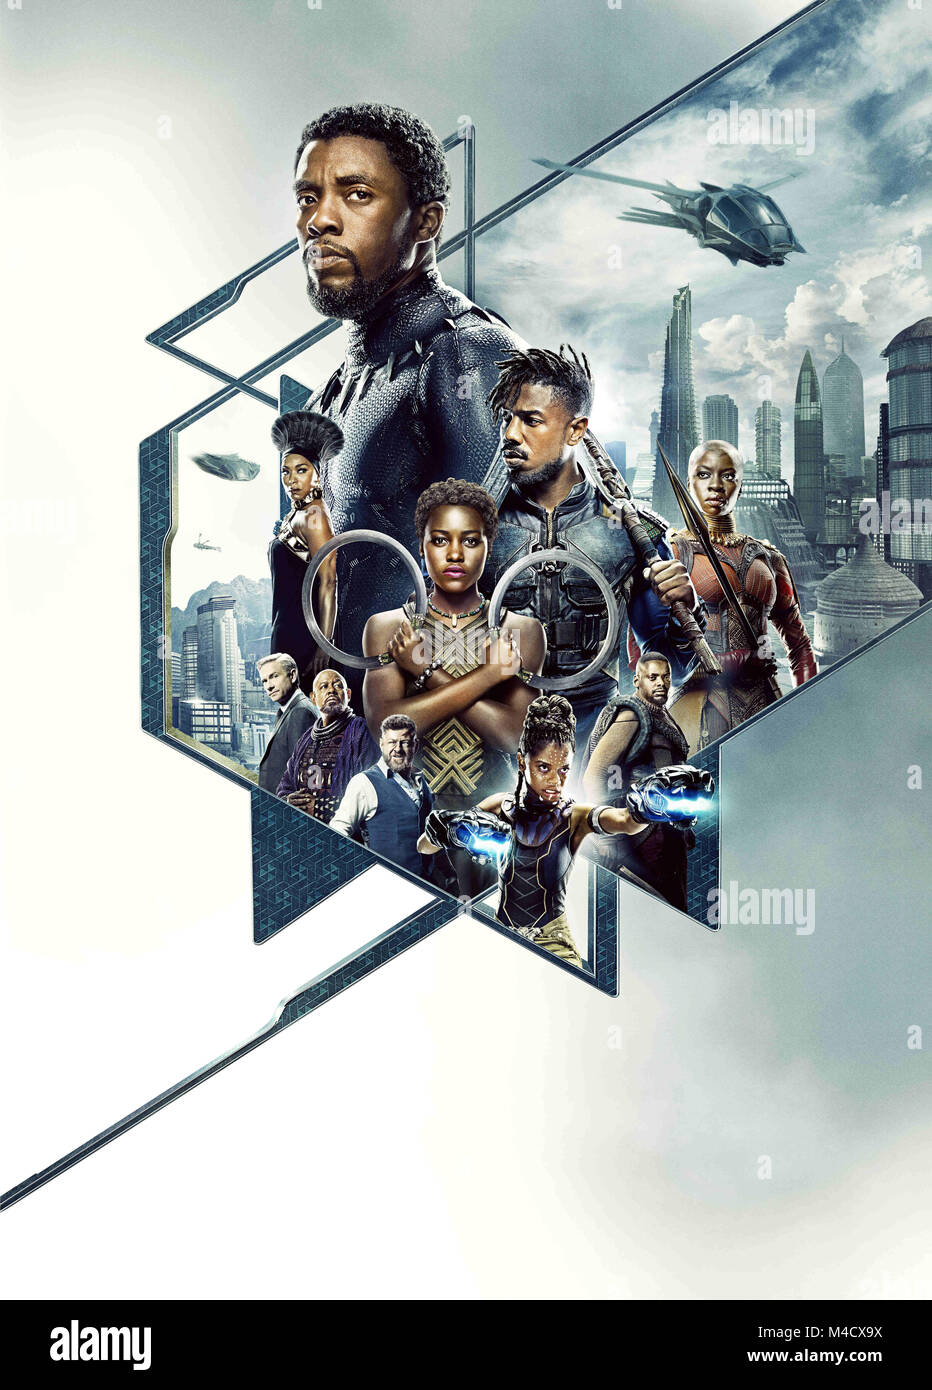 RELEASE DATE: February 16, 2018 TITLE: STUDIO: Marvel Studios DIRECTOR: Ryan Coogler PLOT: T'Challa, after the death of his father, the King of Wakanda, returns home to the isolated, technologically advanced African nation to succeed to the throne and take his rightful place as king. STARRING: Poster Art(Credit Image: © Marvel Studios/Entertainment Pictures) Stock Photo